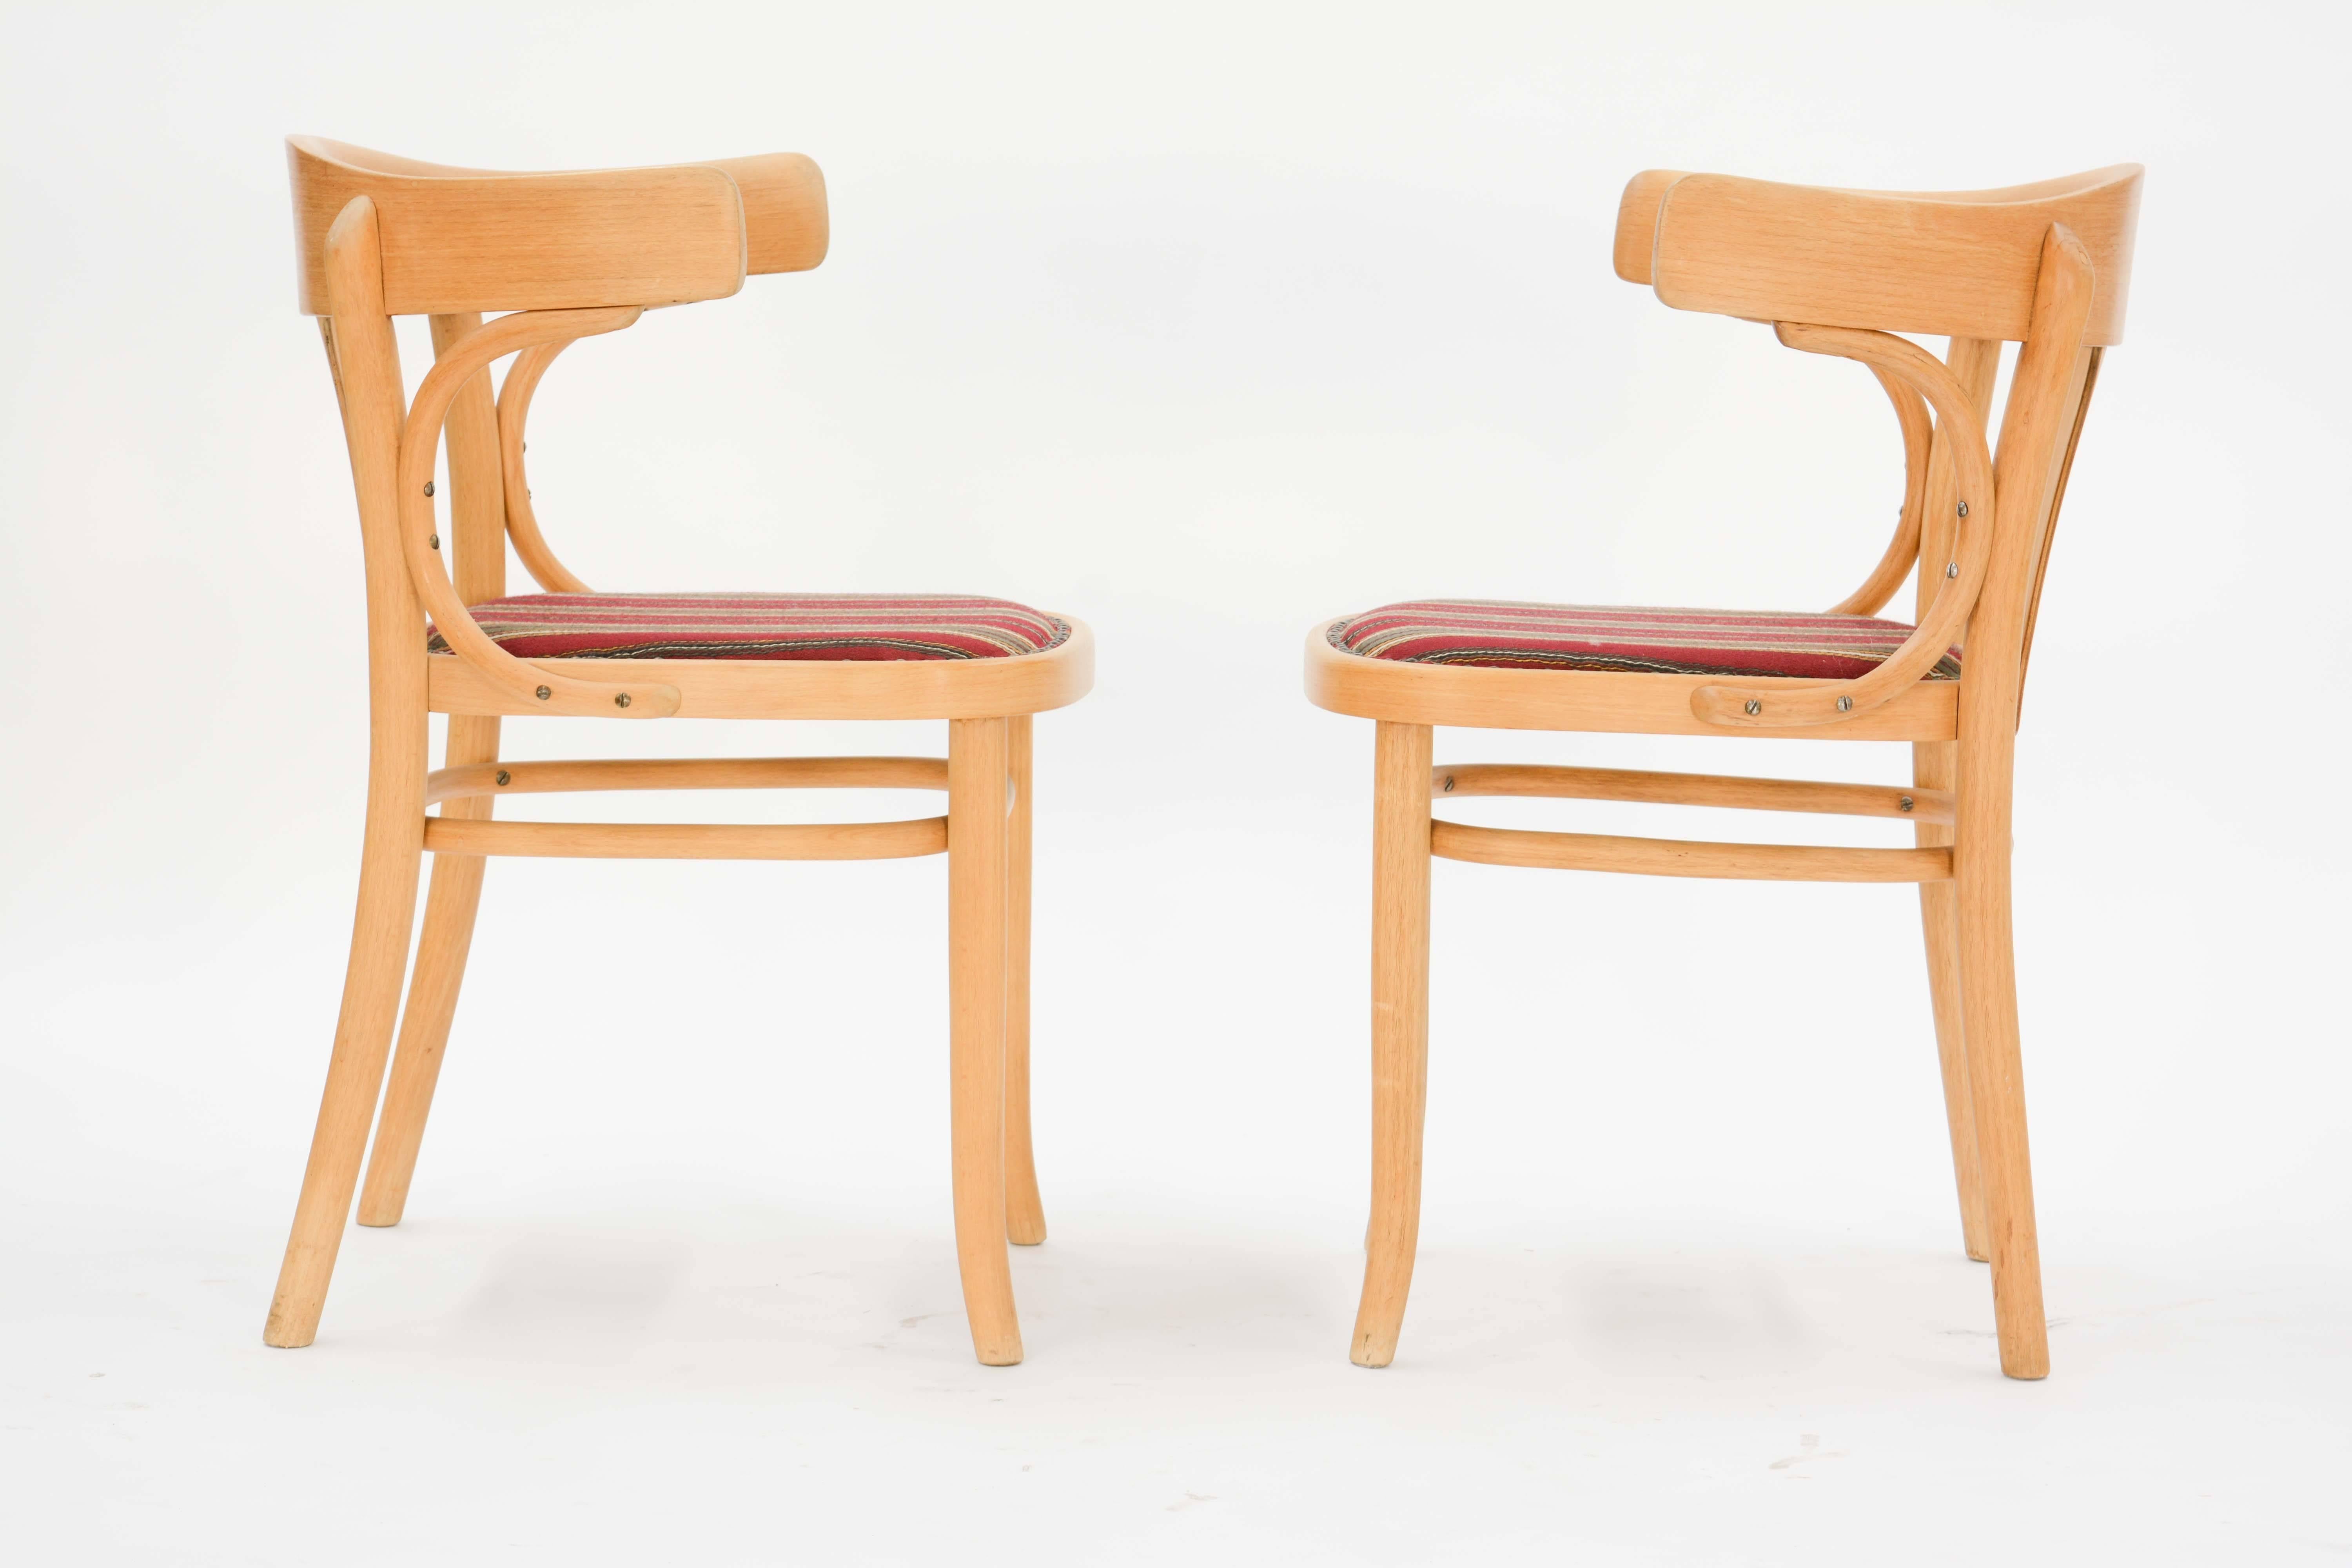 A pair of exquisite Austrian bentwood chairs by Jacob and Josef Kohn.  

Jacob Kohn, together with his son Josef Kohn, founded a furniture making and interior design firm in Vienna in 1849, and rose to become one of the leading furniture makers in